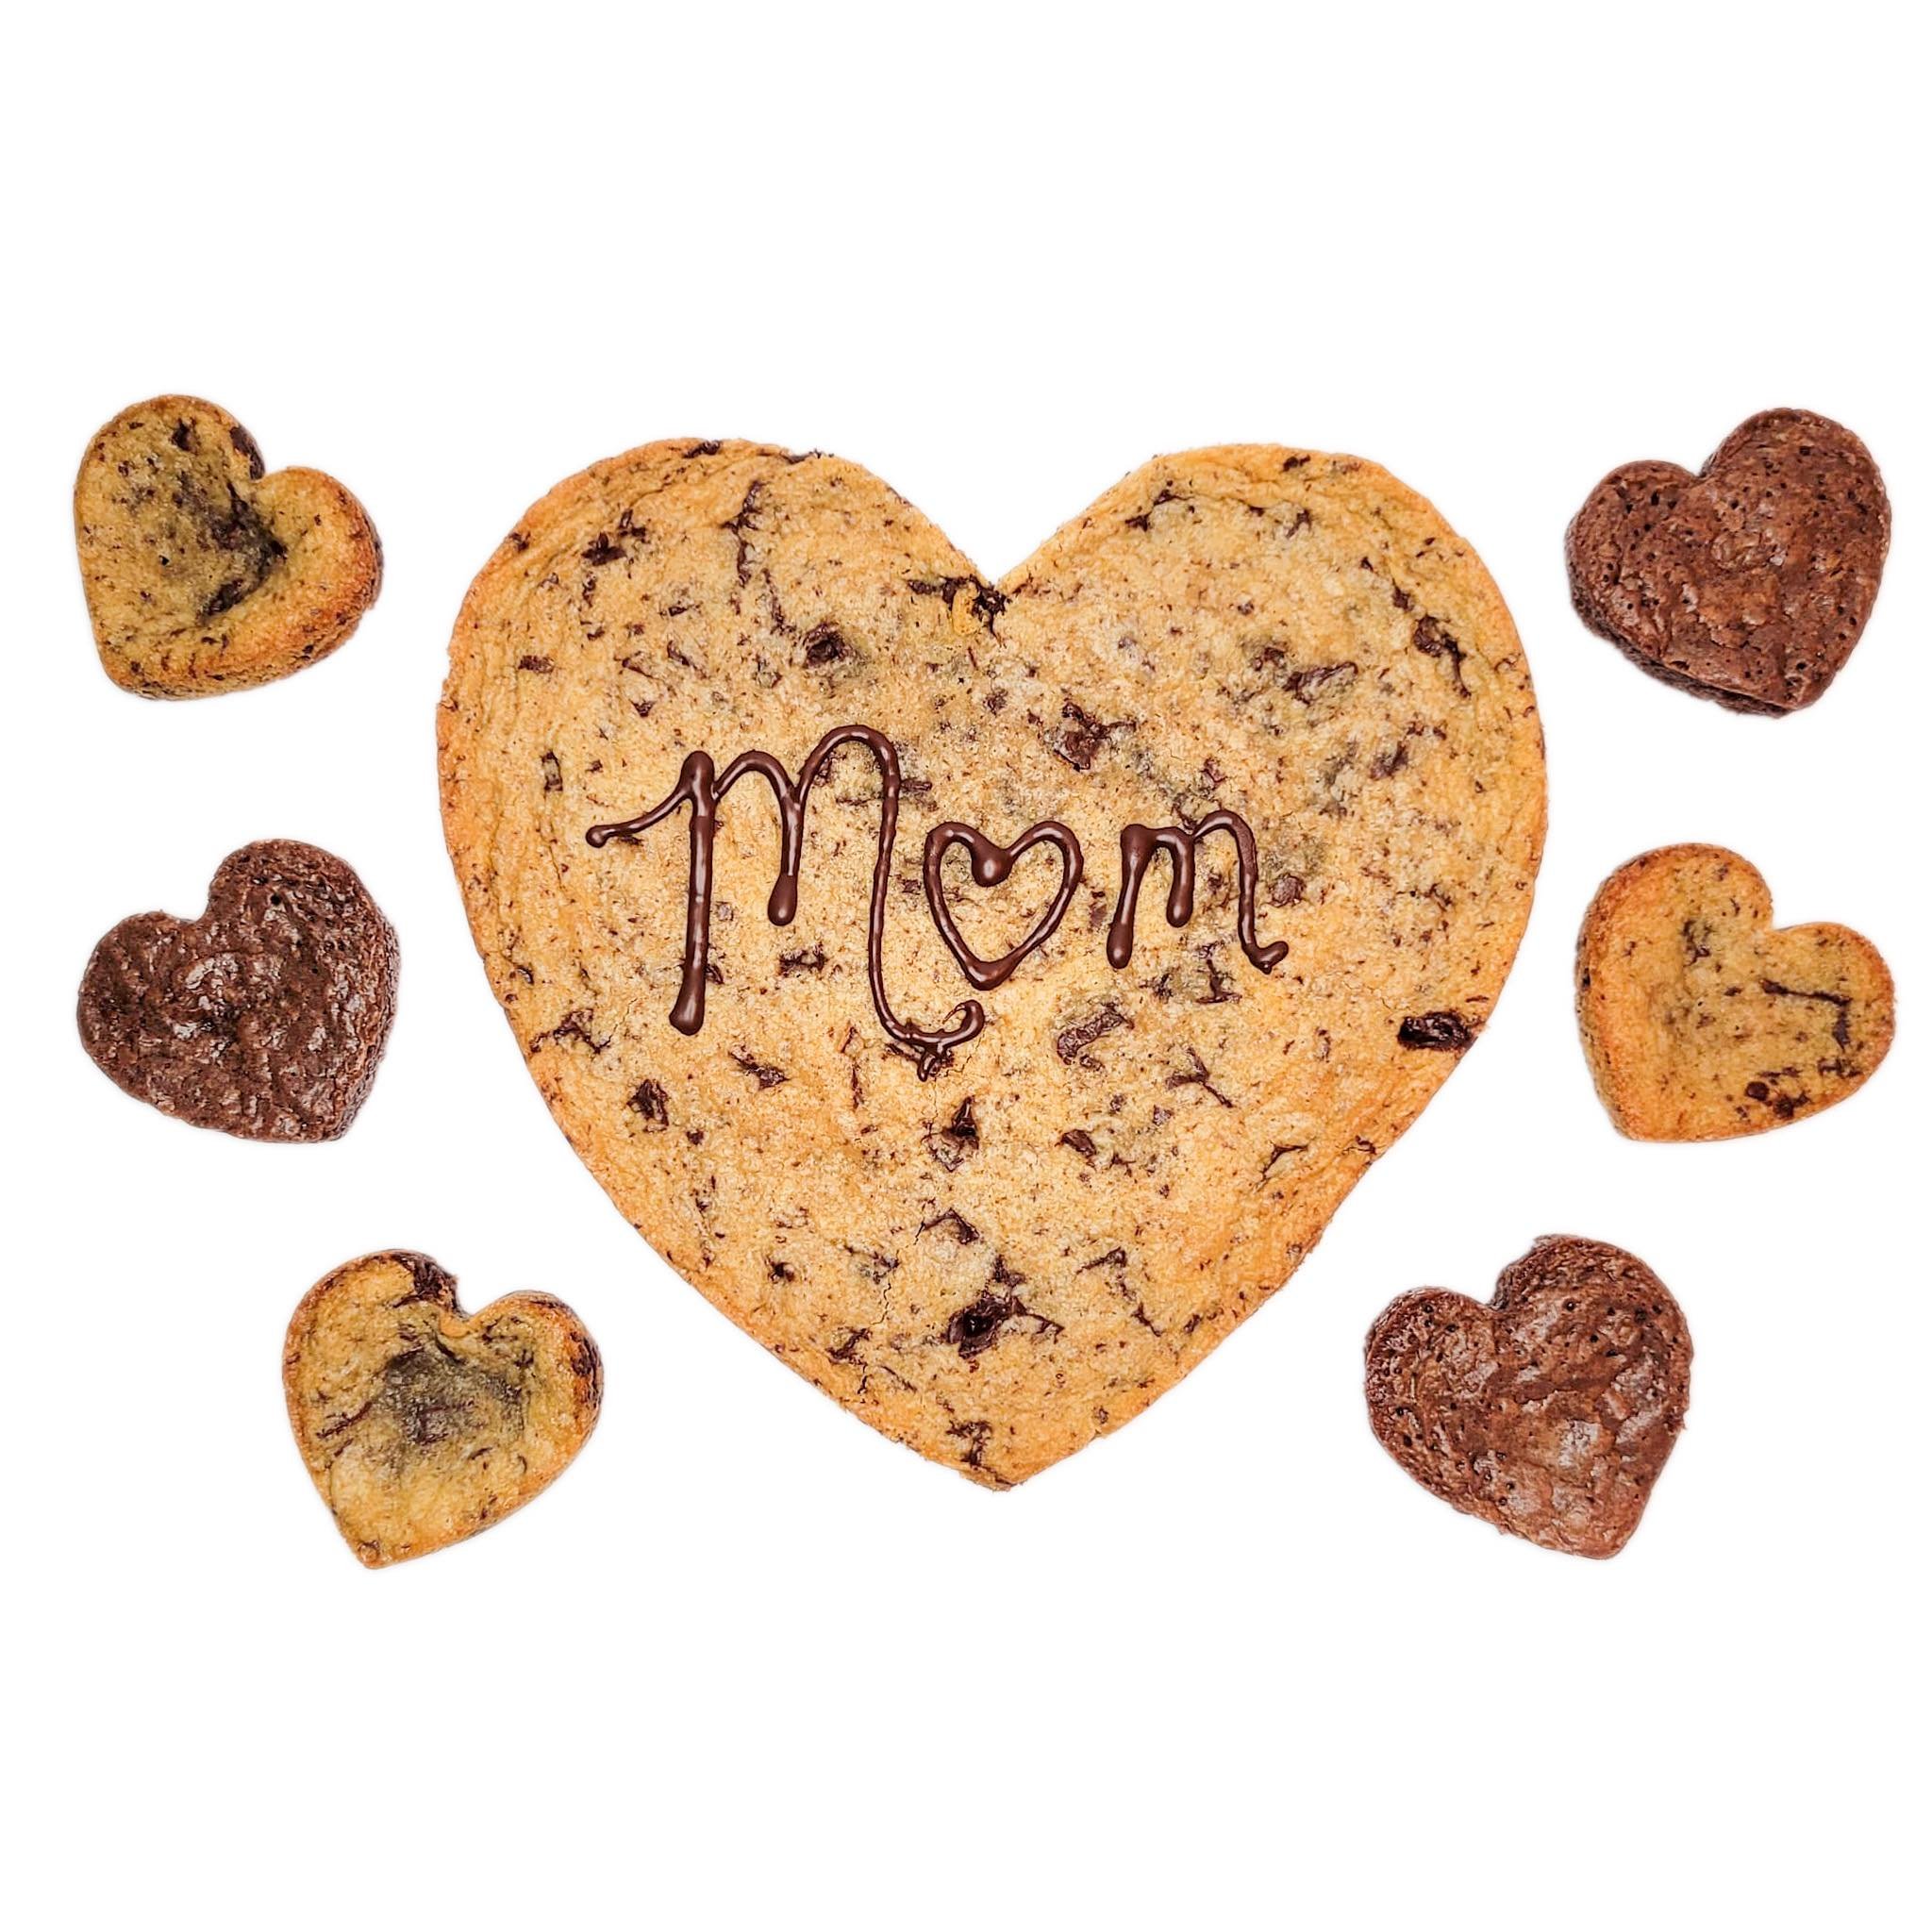 🌸 One week until Mother&rsquo;s Day! 💕 
Cherish your mom this Mother&rsquo;s Day - biological, adopted, step-moms, fur baby moms, and every nurturing soul who fills the role of &lsquo;mom&rsquo; in our lives by giving them a sweet treat! 
Order tod